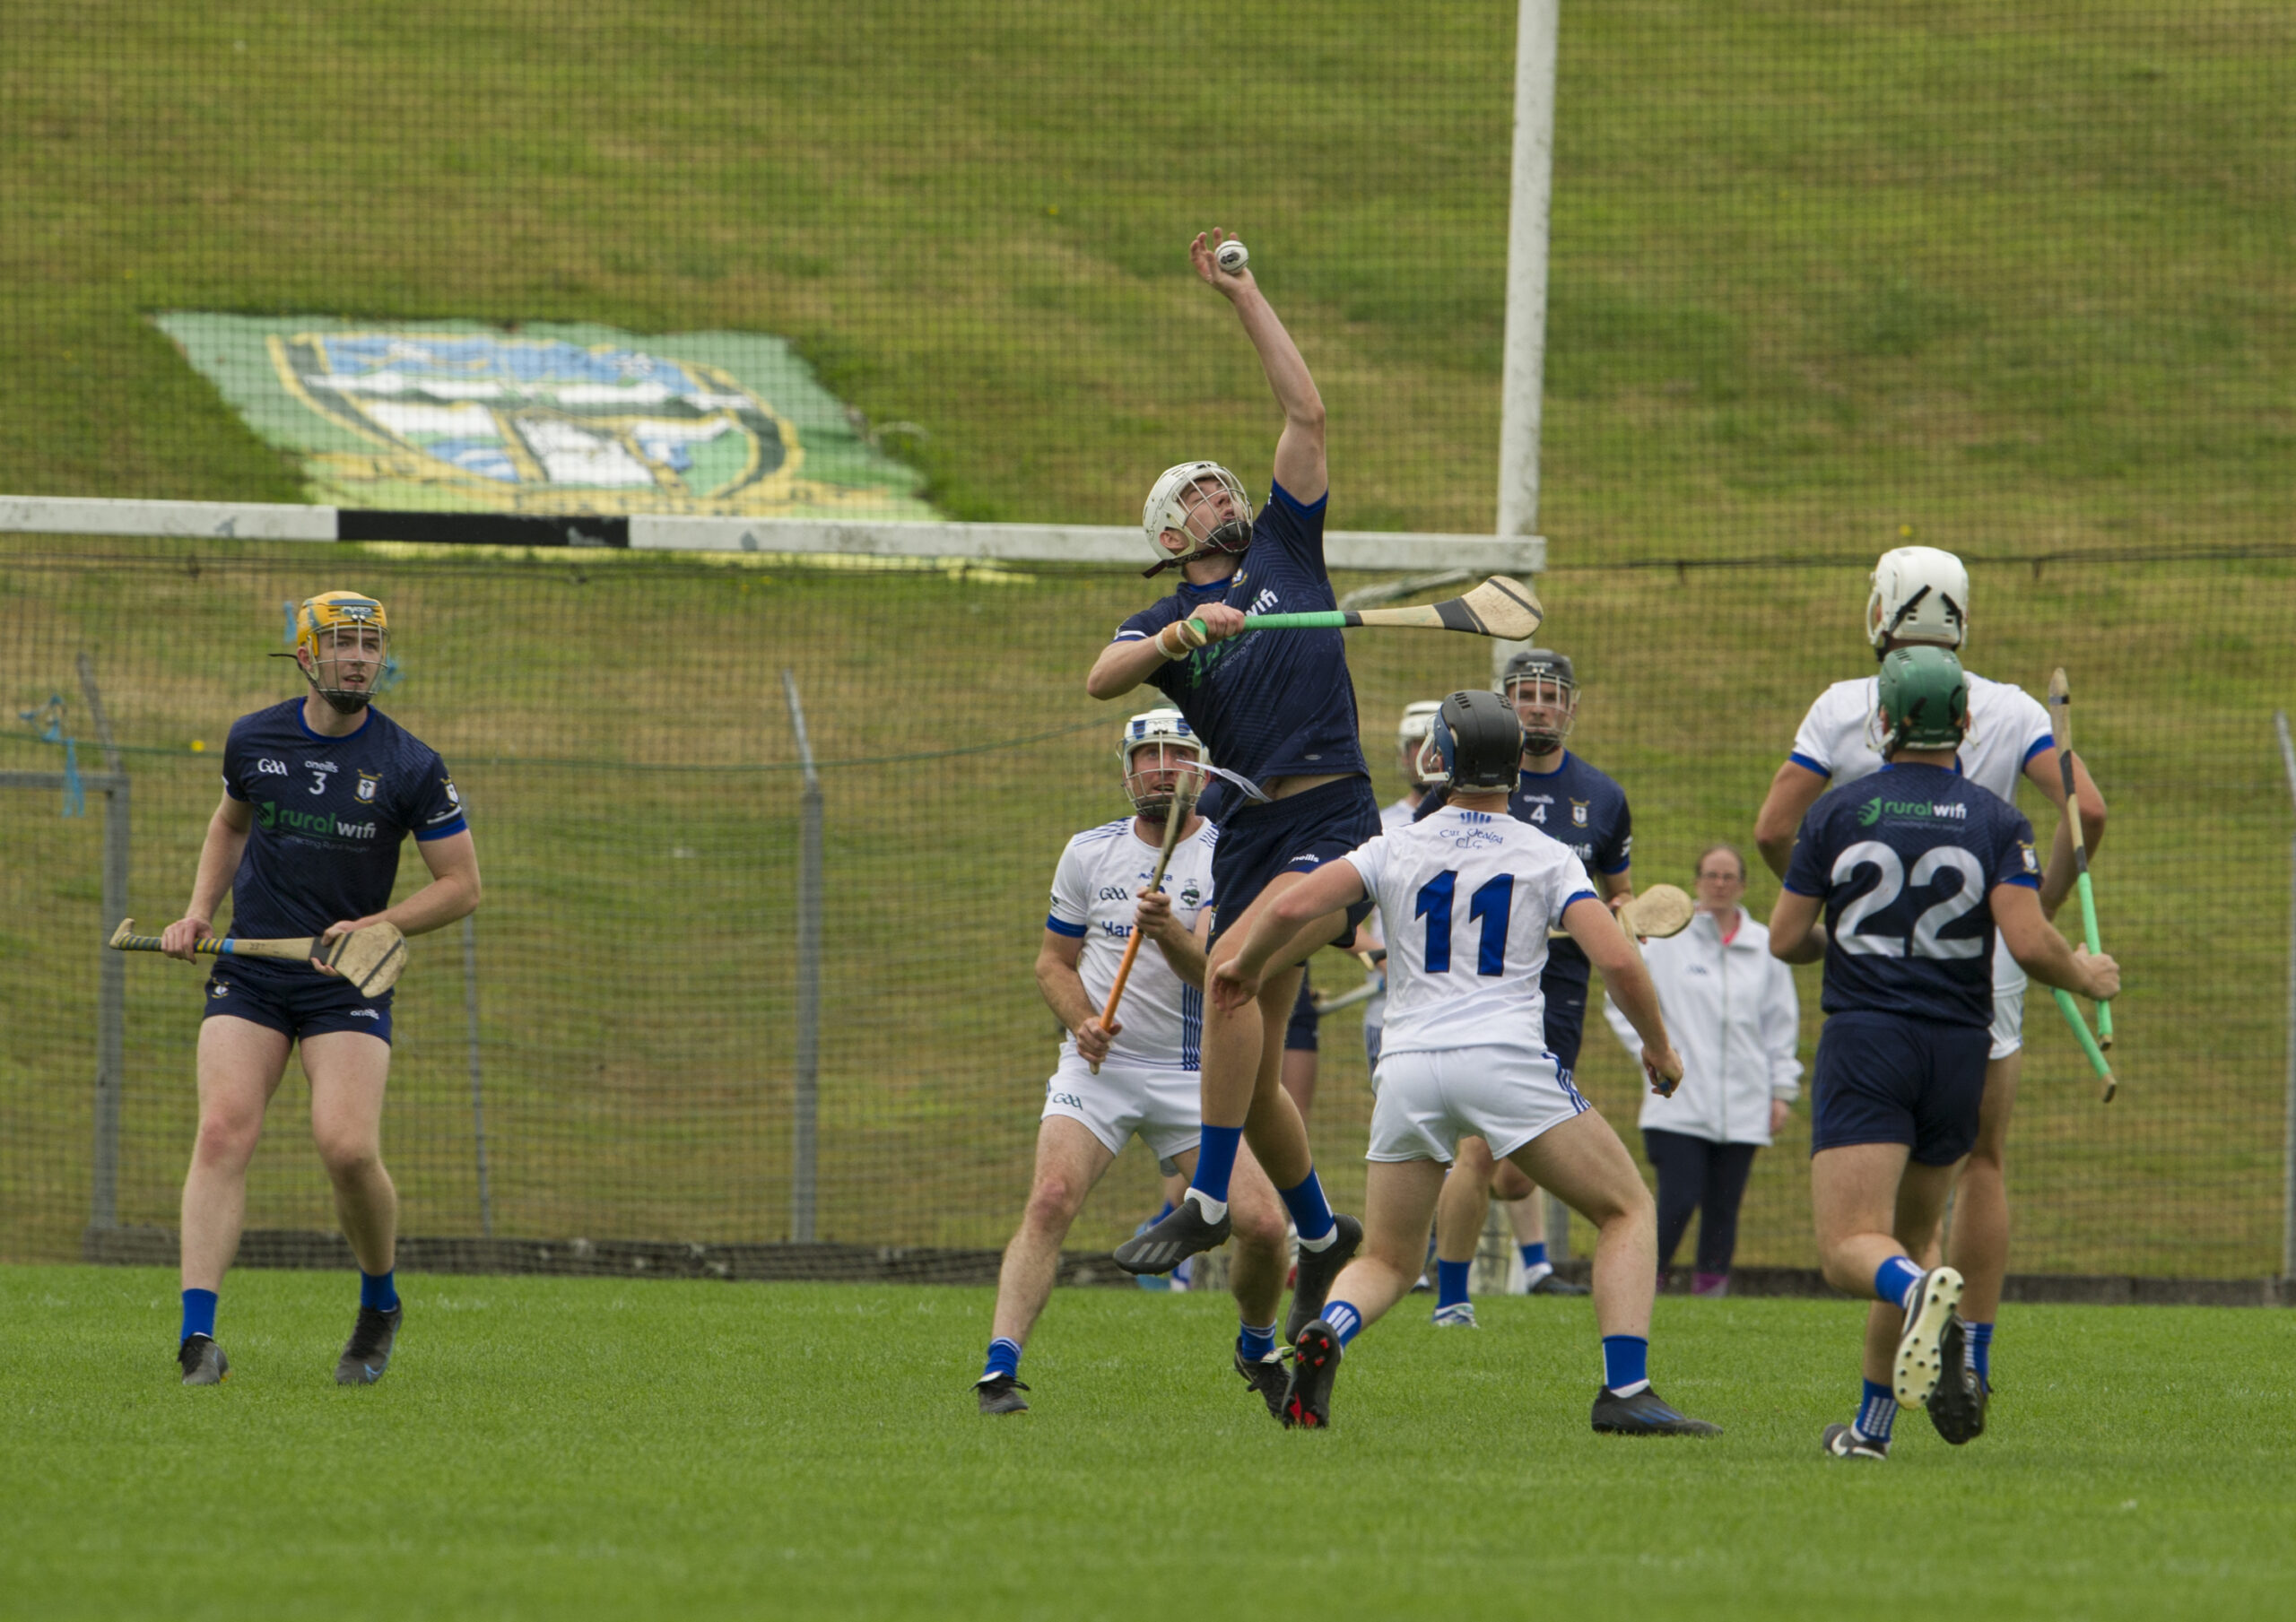 Hurling Championship Round 3 action draws to a conclusion